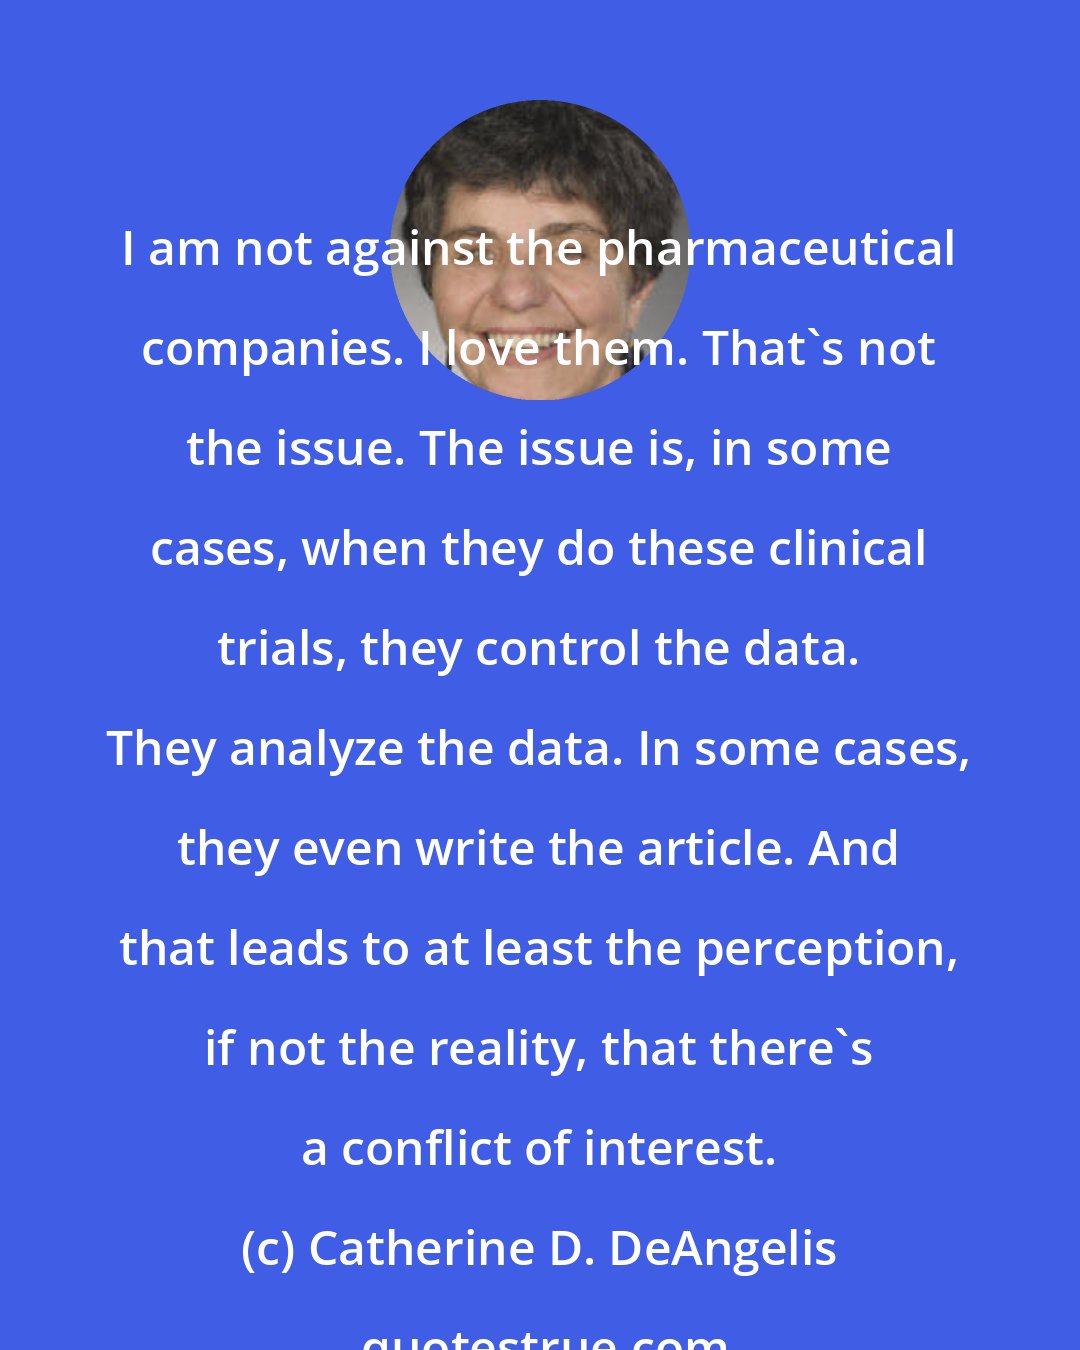 Catherine D. DeAngelis: I am not against the pharmaceutical companies. I love them. That's not the issue. The issue is, in some cases, when they do these clinical trials, they control the data. They analyze the data. In some cases, they even write the article. And that leads to at least the perception, if not the reality, that there's a conflict of interest.